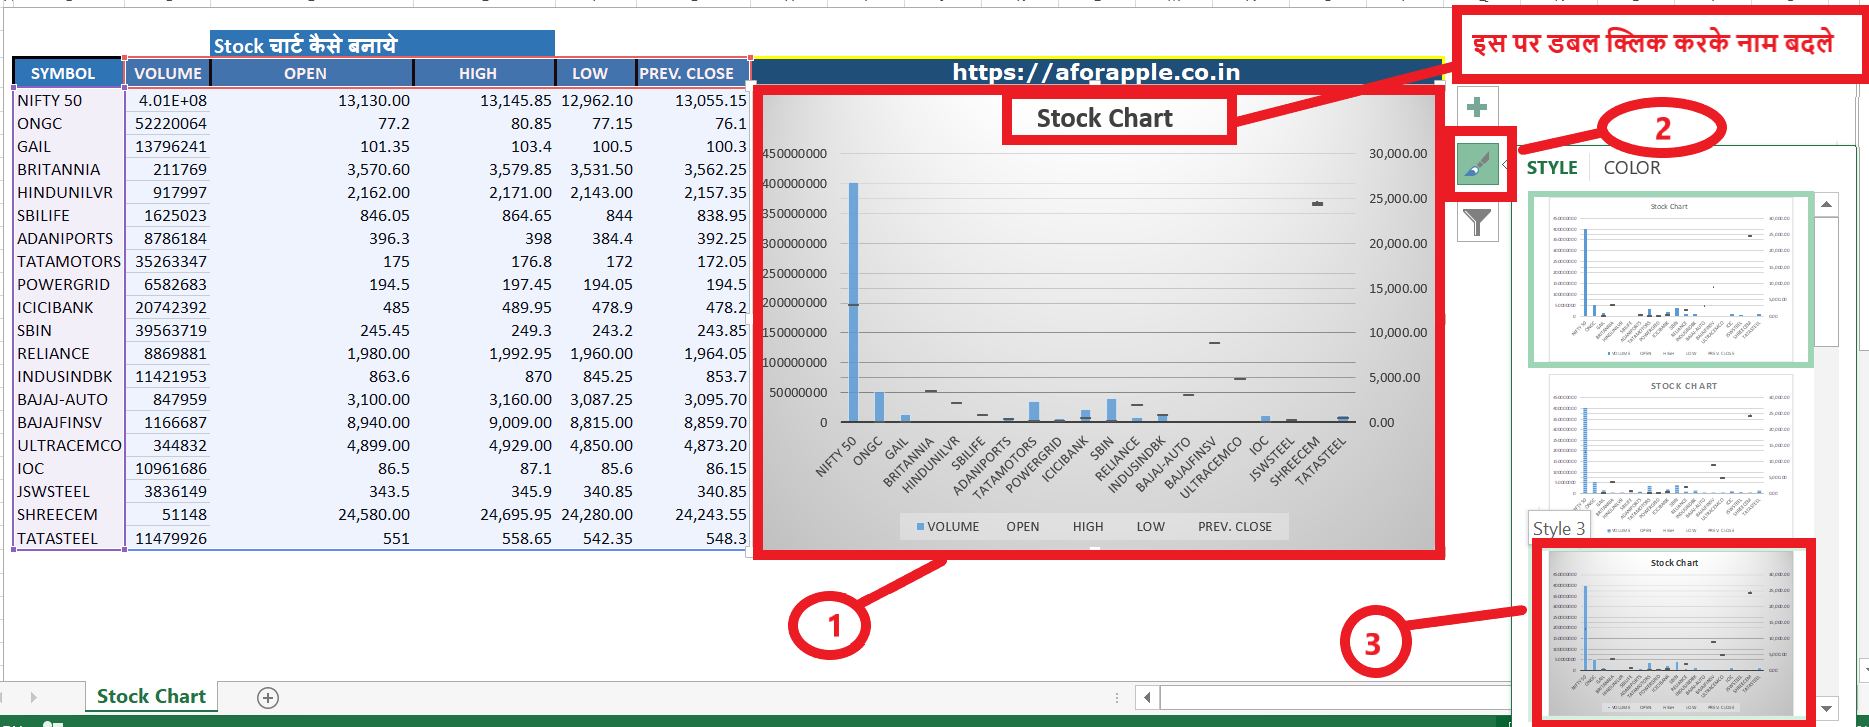 ms-excel-stock-charts_04